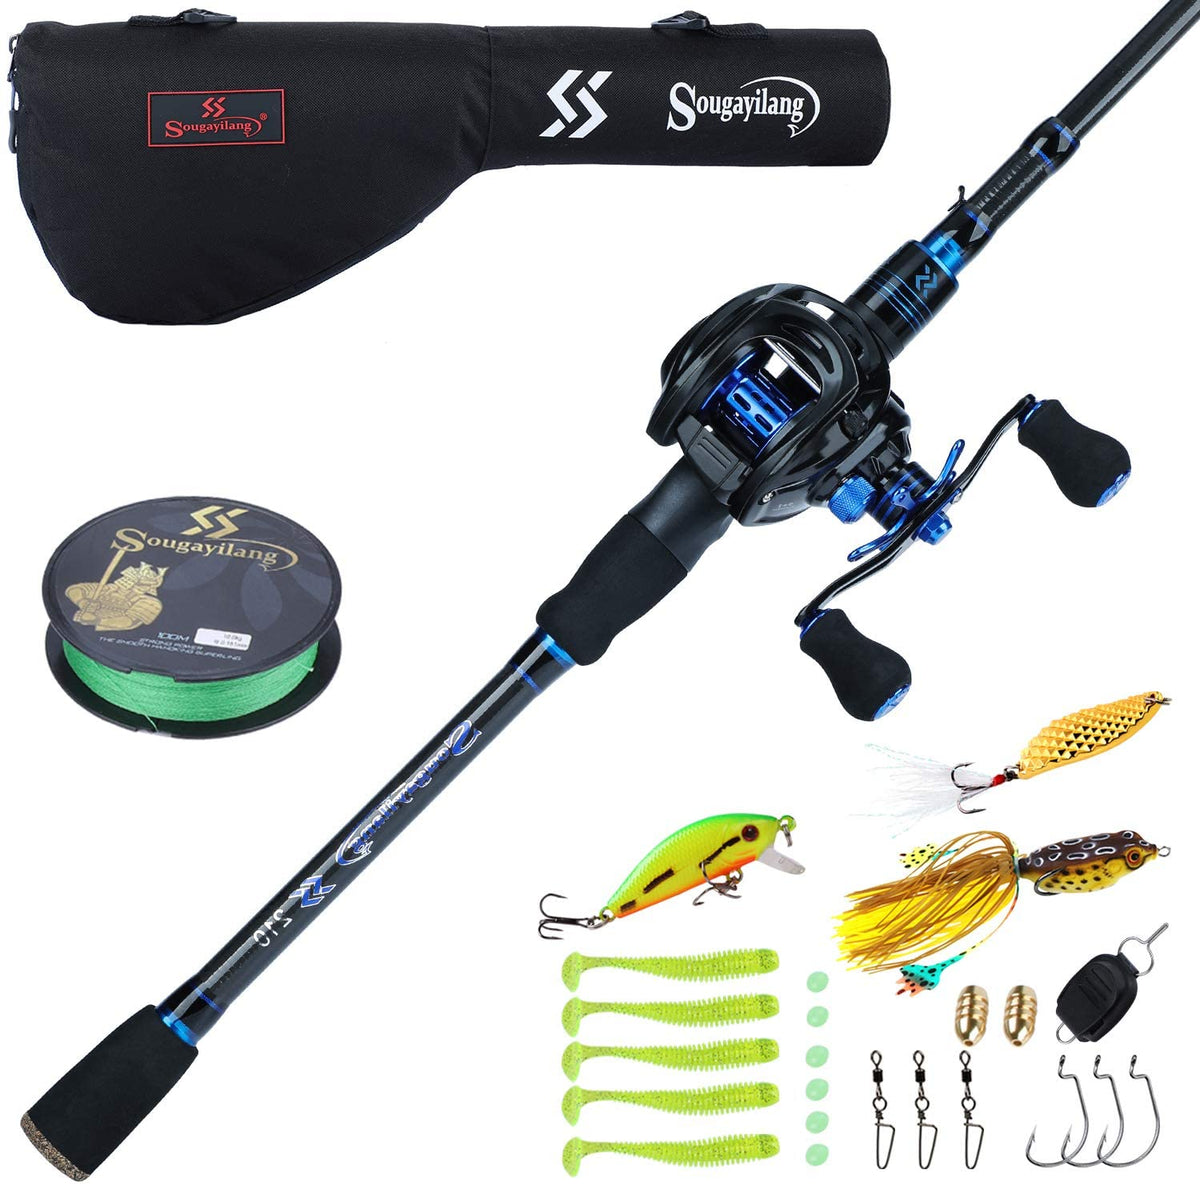 GDA Fishing Set Portable Ultralight Rod And Reel Combo For Travel And  Fishing Strong Casting Ultralight Baitcasting Rod Set For Single Rod 230718  From Nian07, $20.23